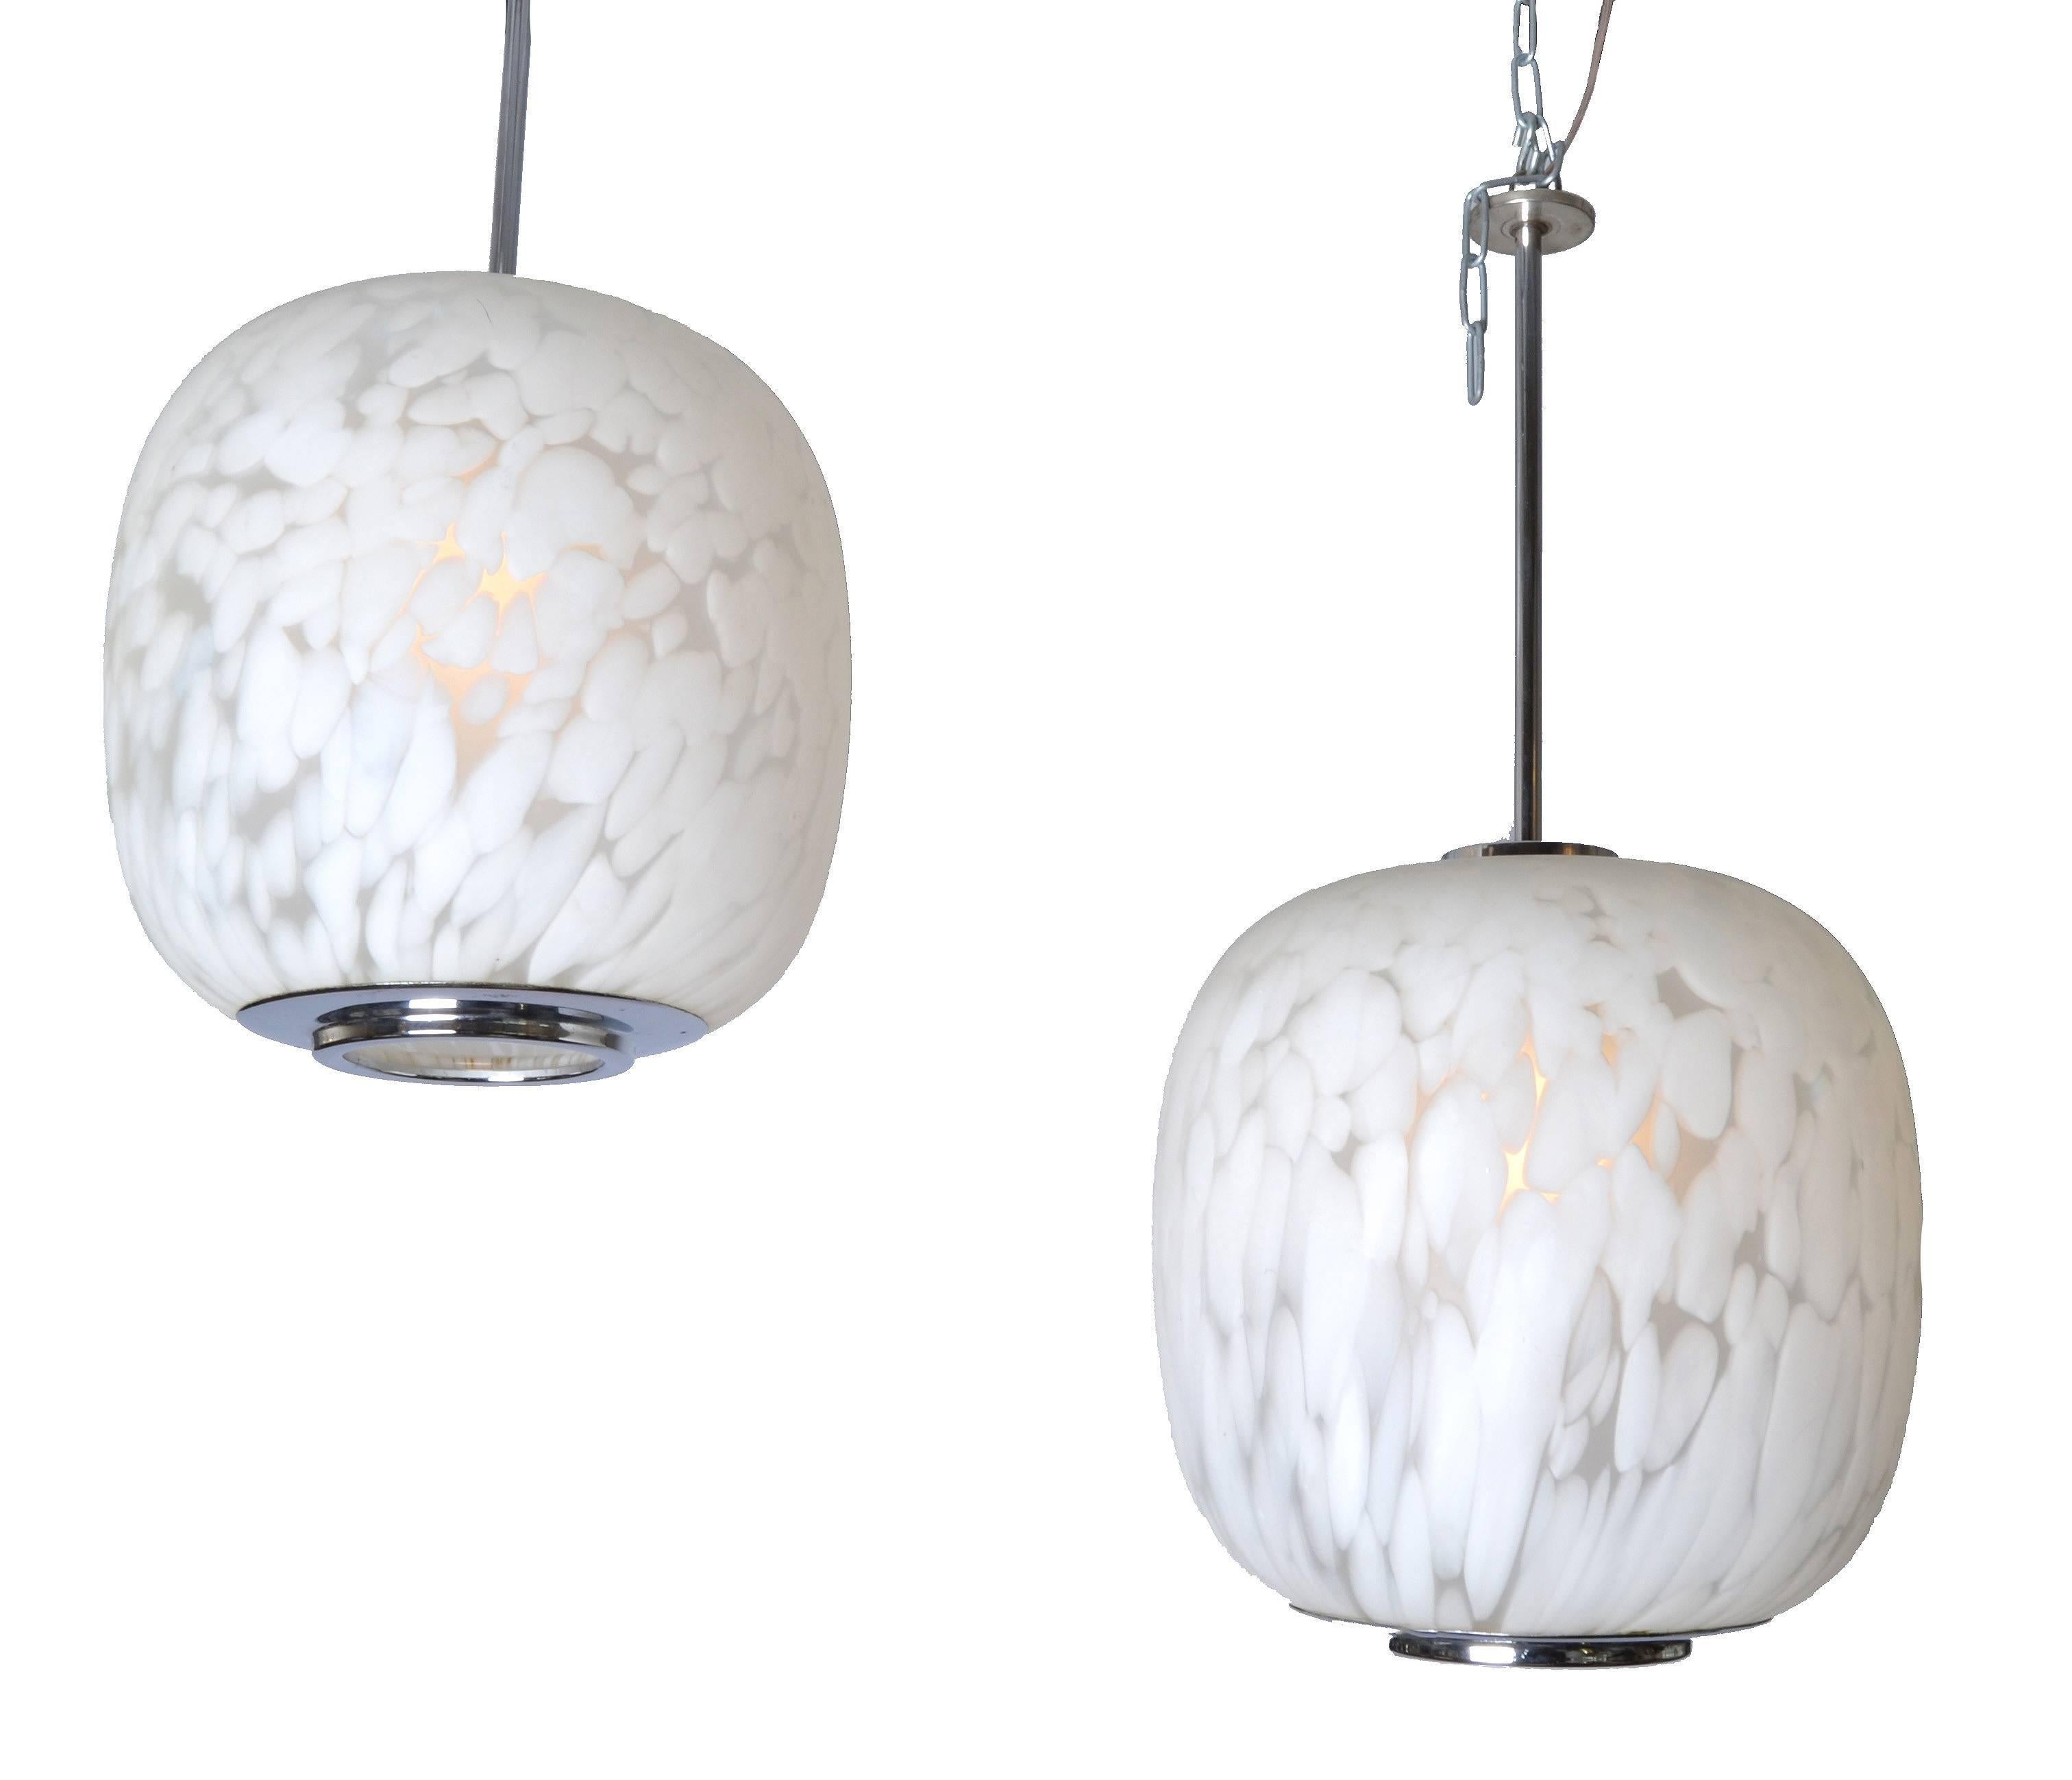 A pair of Italian pendant light attributed to Mazzega. Manufactured, circa 1960 in mottled white Murano glass with chrome shaft and base.
Wired for the U.S. and uses a 60 watts light bulb.
All original vintage condition.